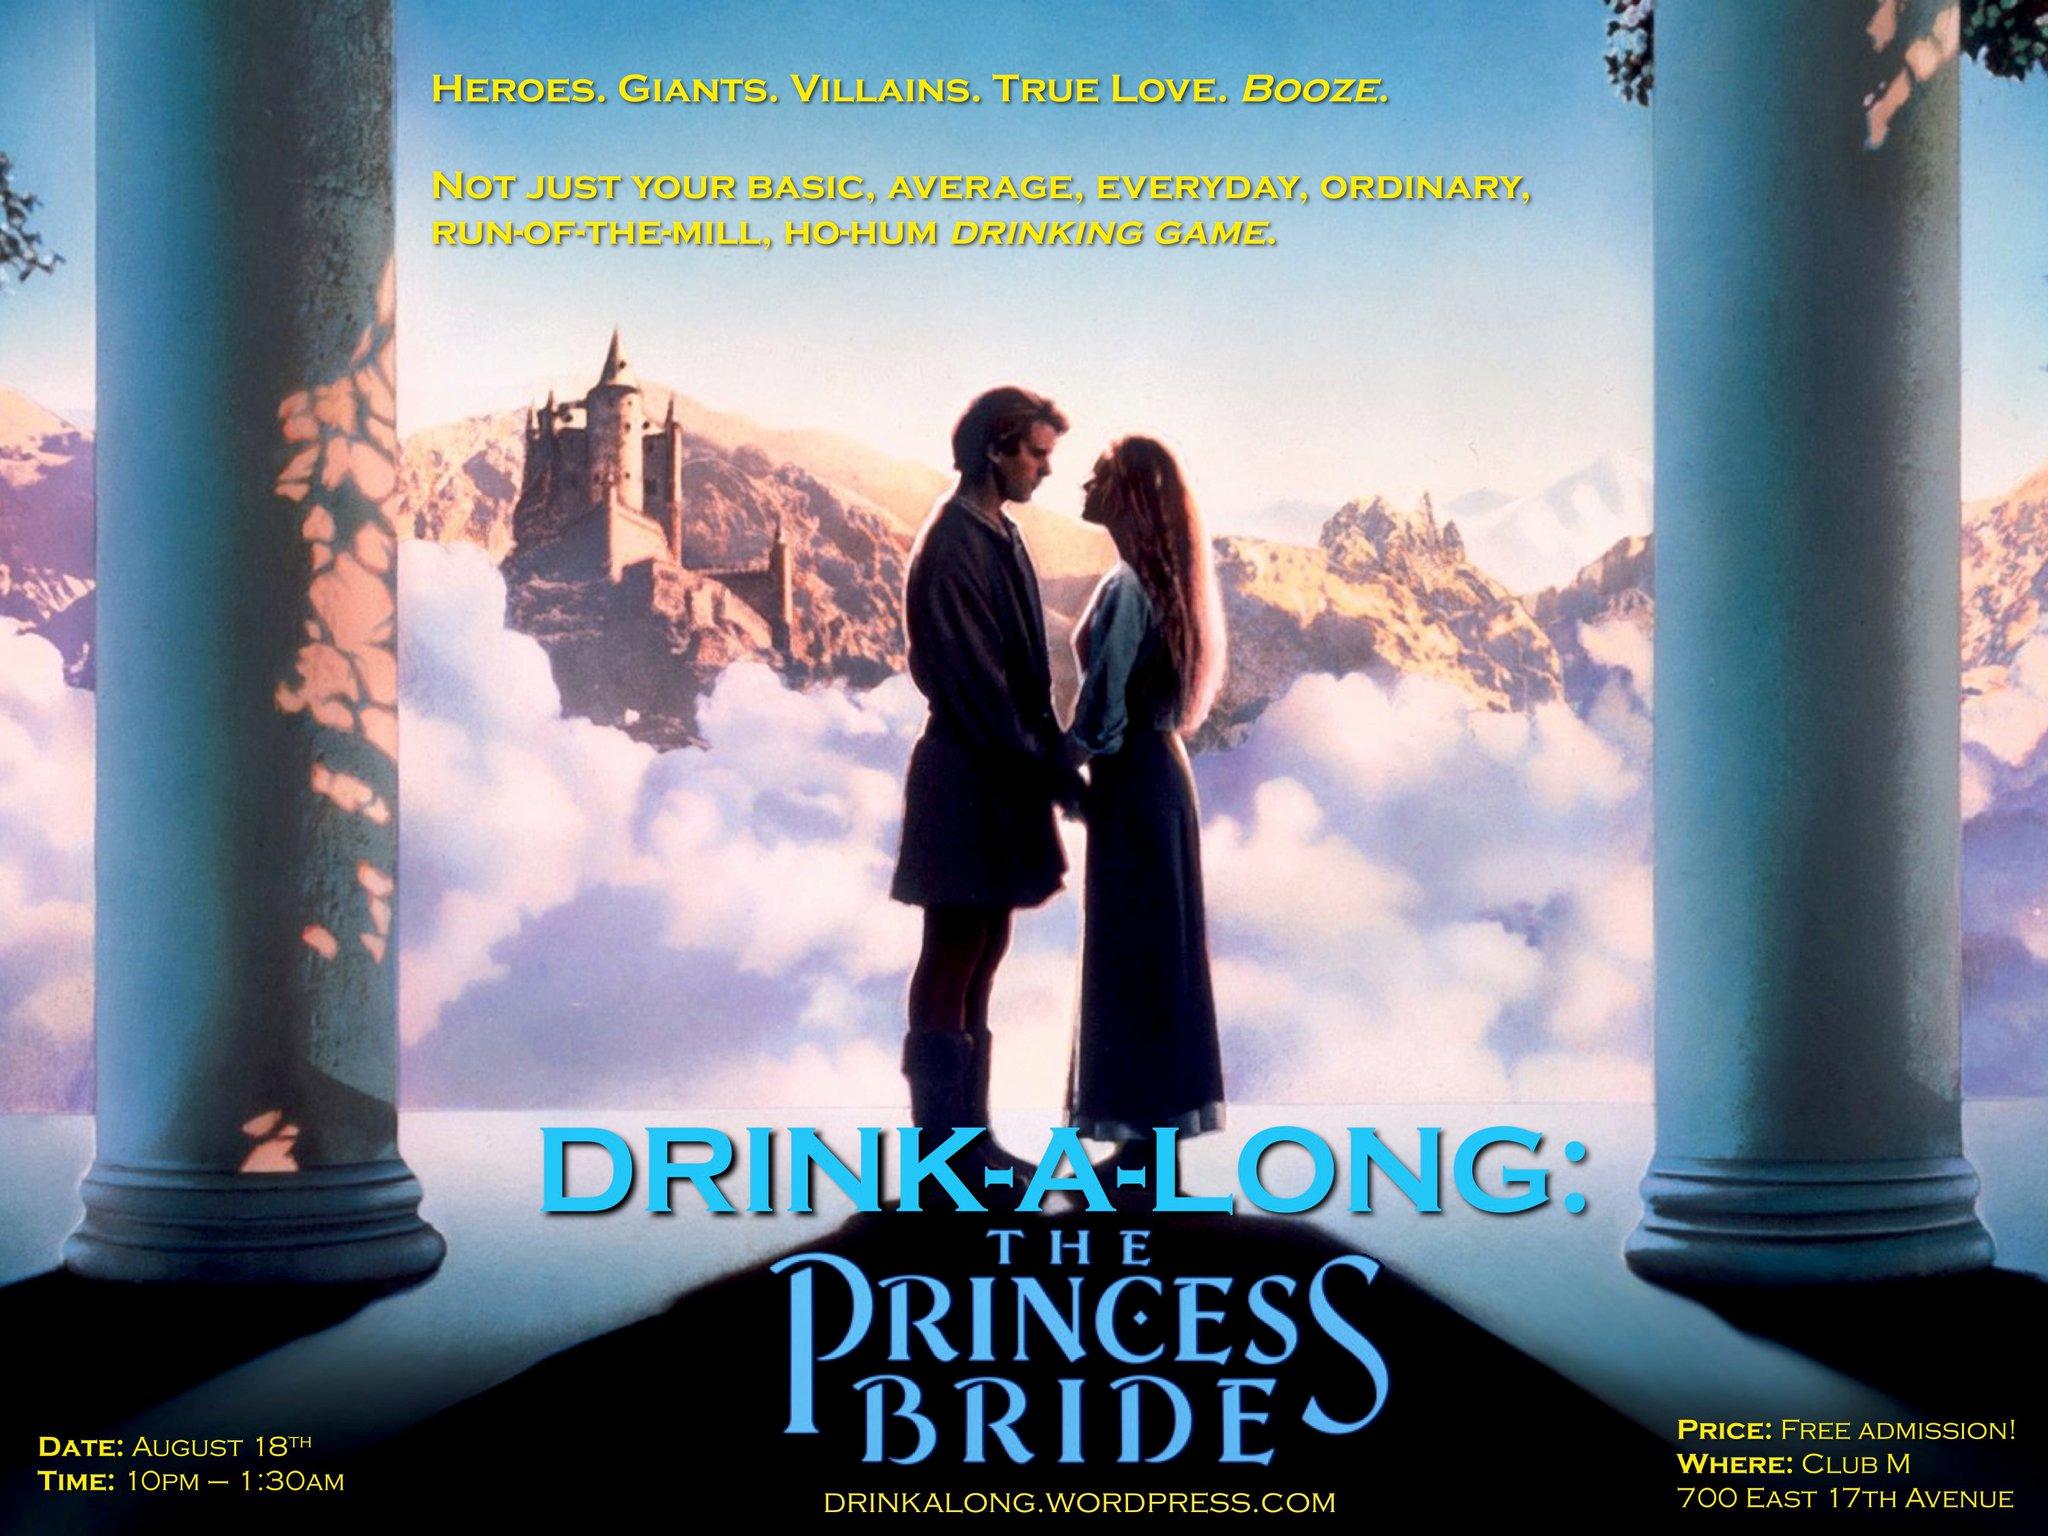 Updated Cast List: 'Drink A Long: The Princess Bride'. He Said She